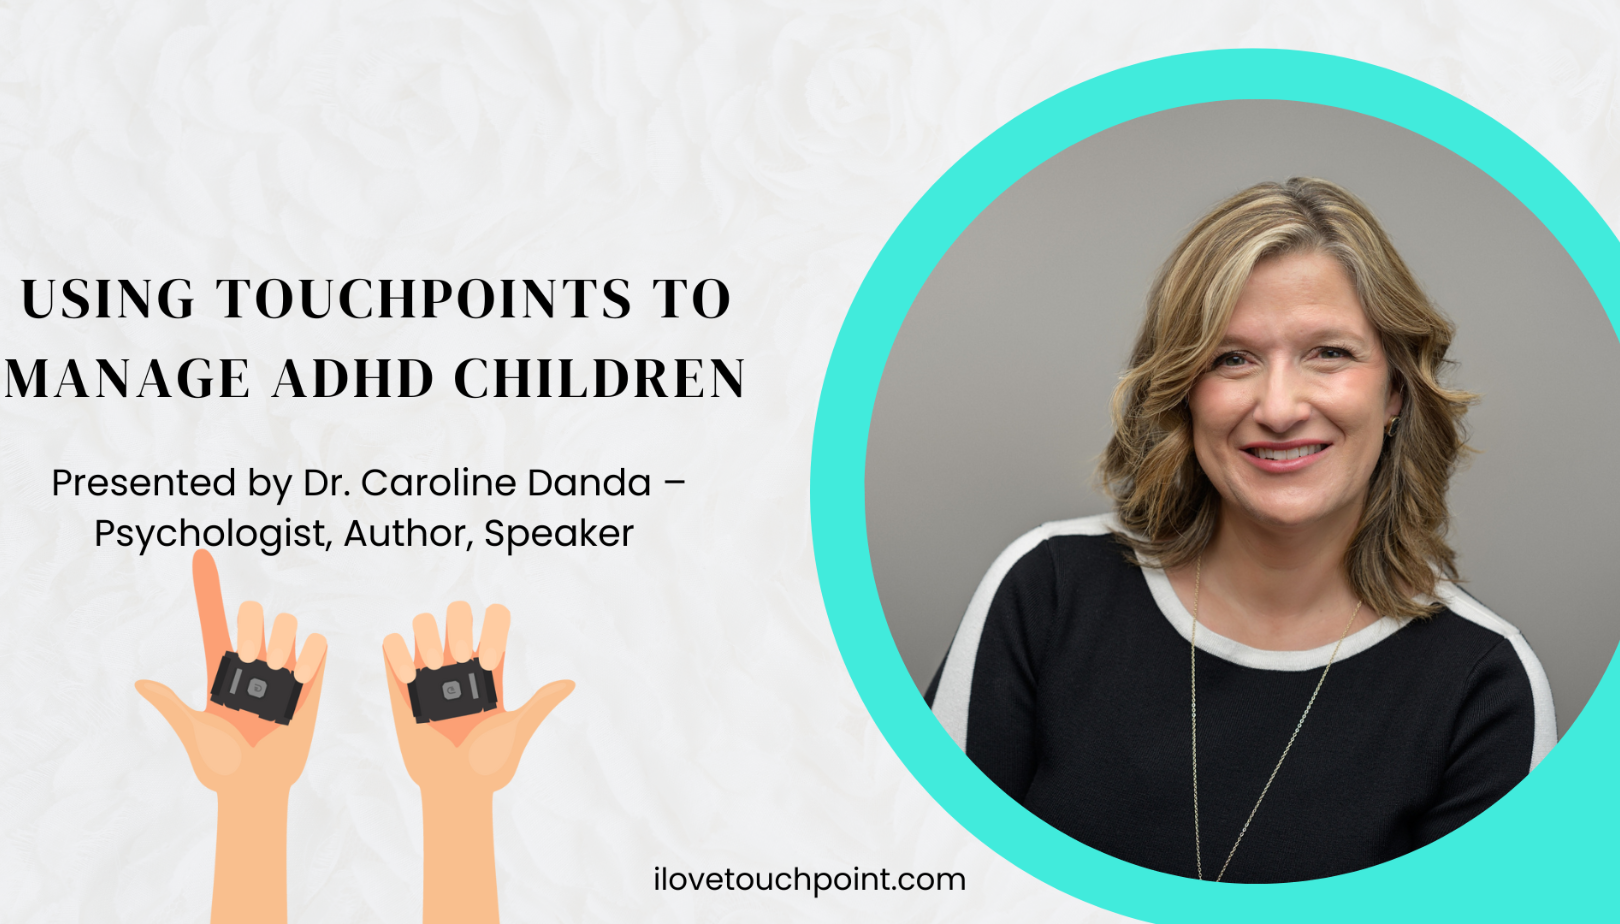 UPCOMING FREE WEBINAR: Using TouchPoints to Manage ADHD Children with Dr. Caroline Danda